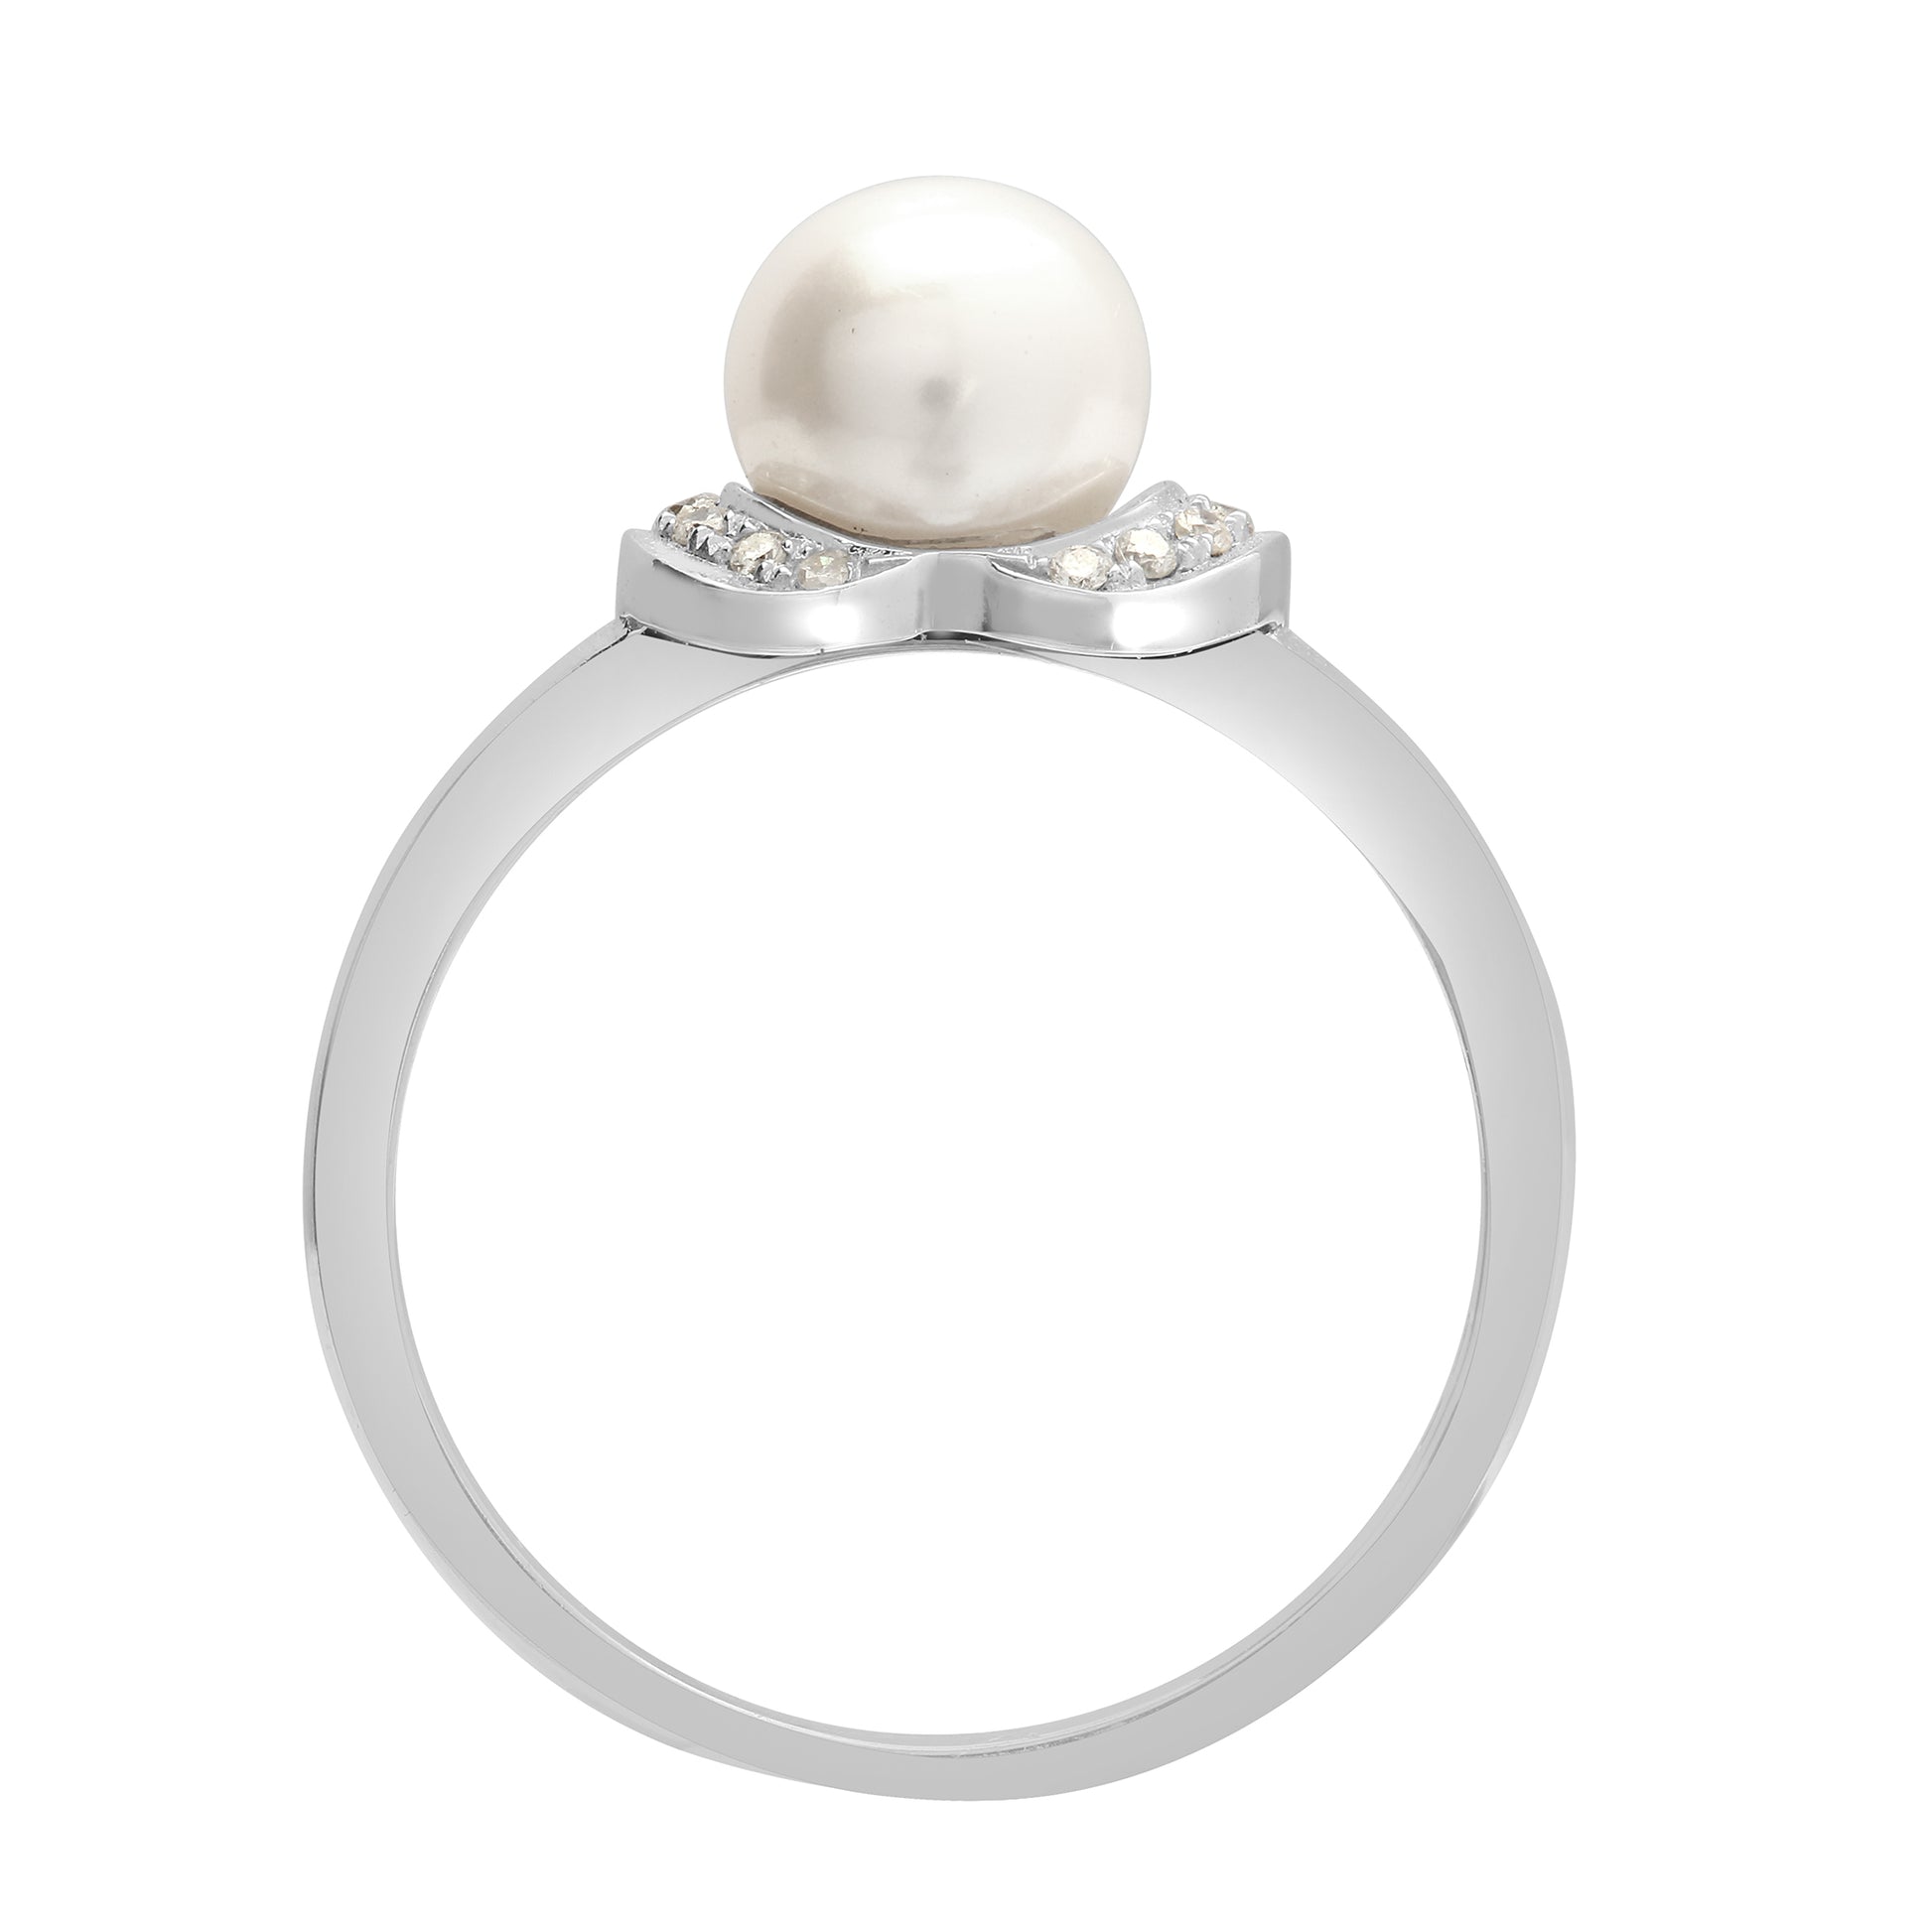 18ct White Gold  Diamond Pearl Collared Solitaire Ring 7mm - 18R647